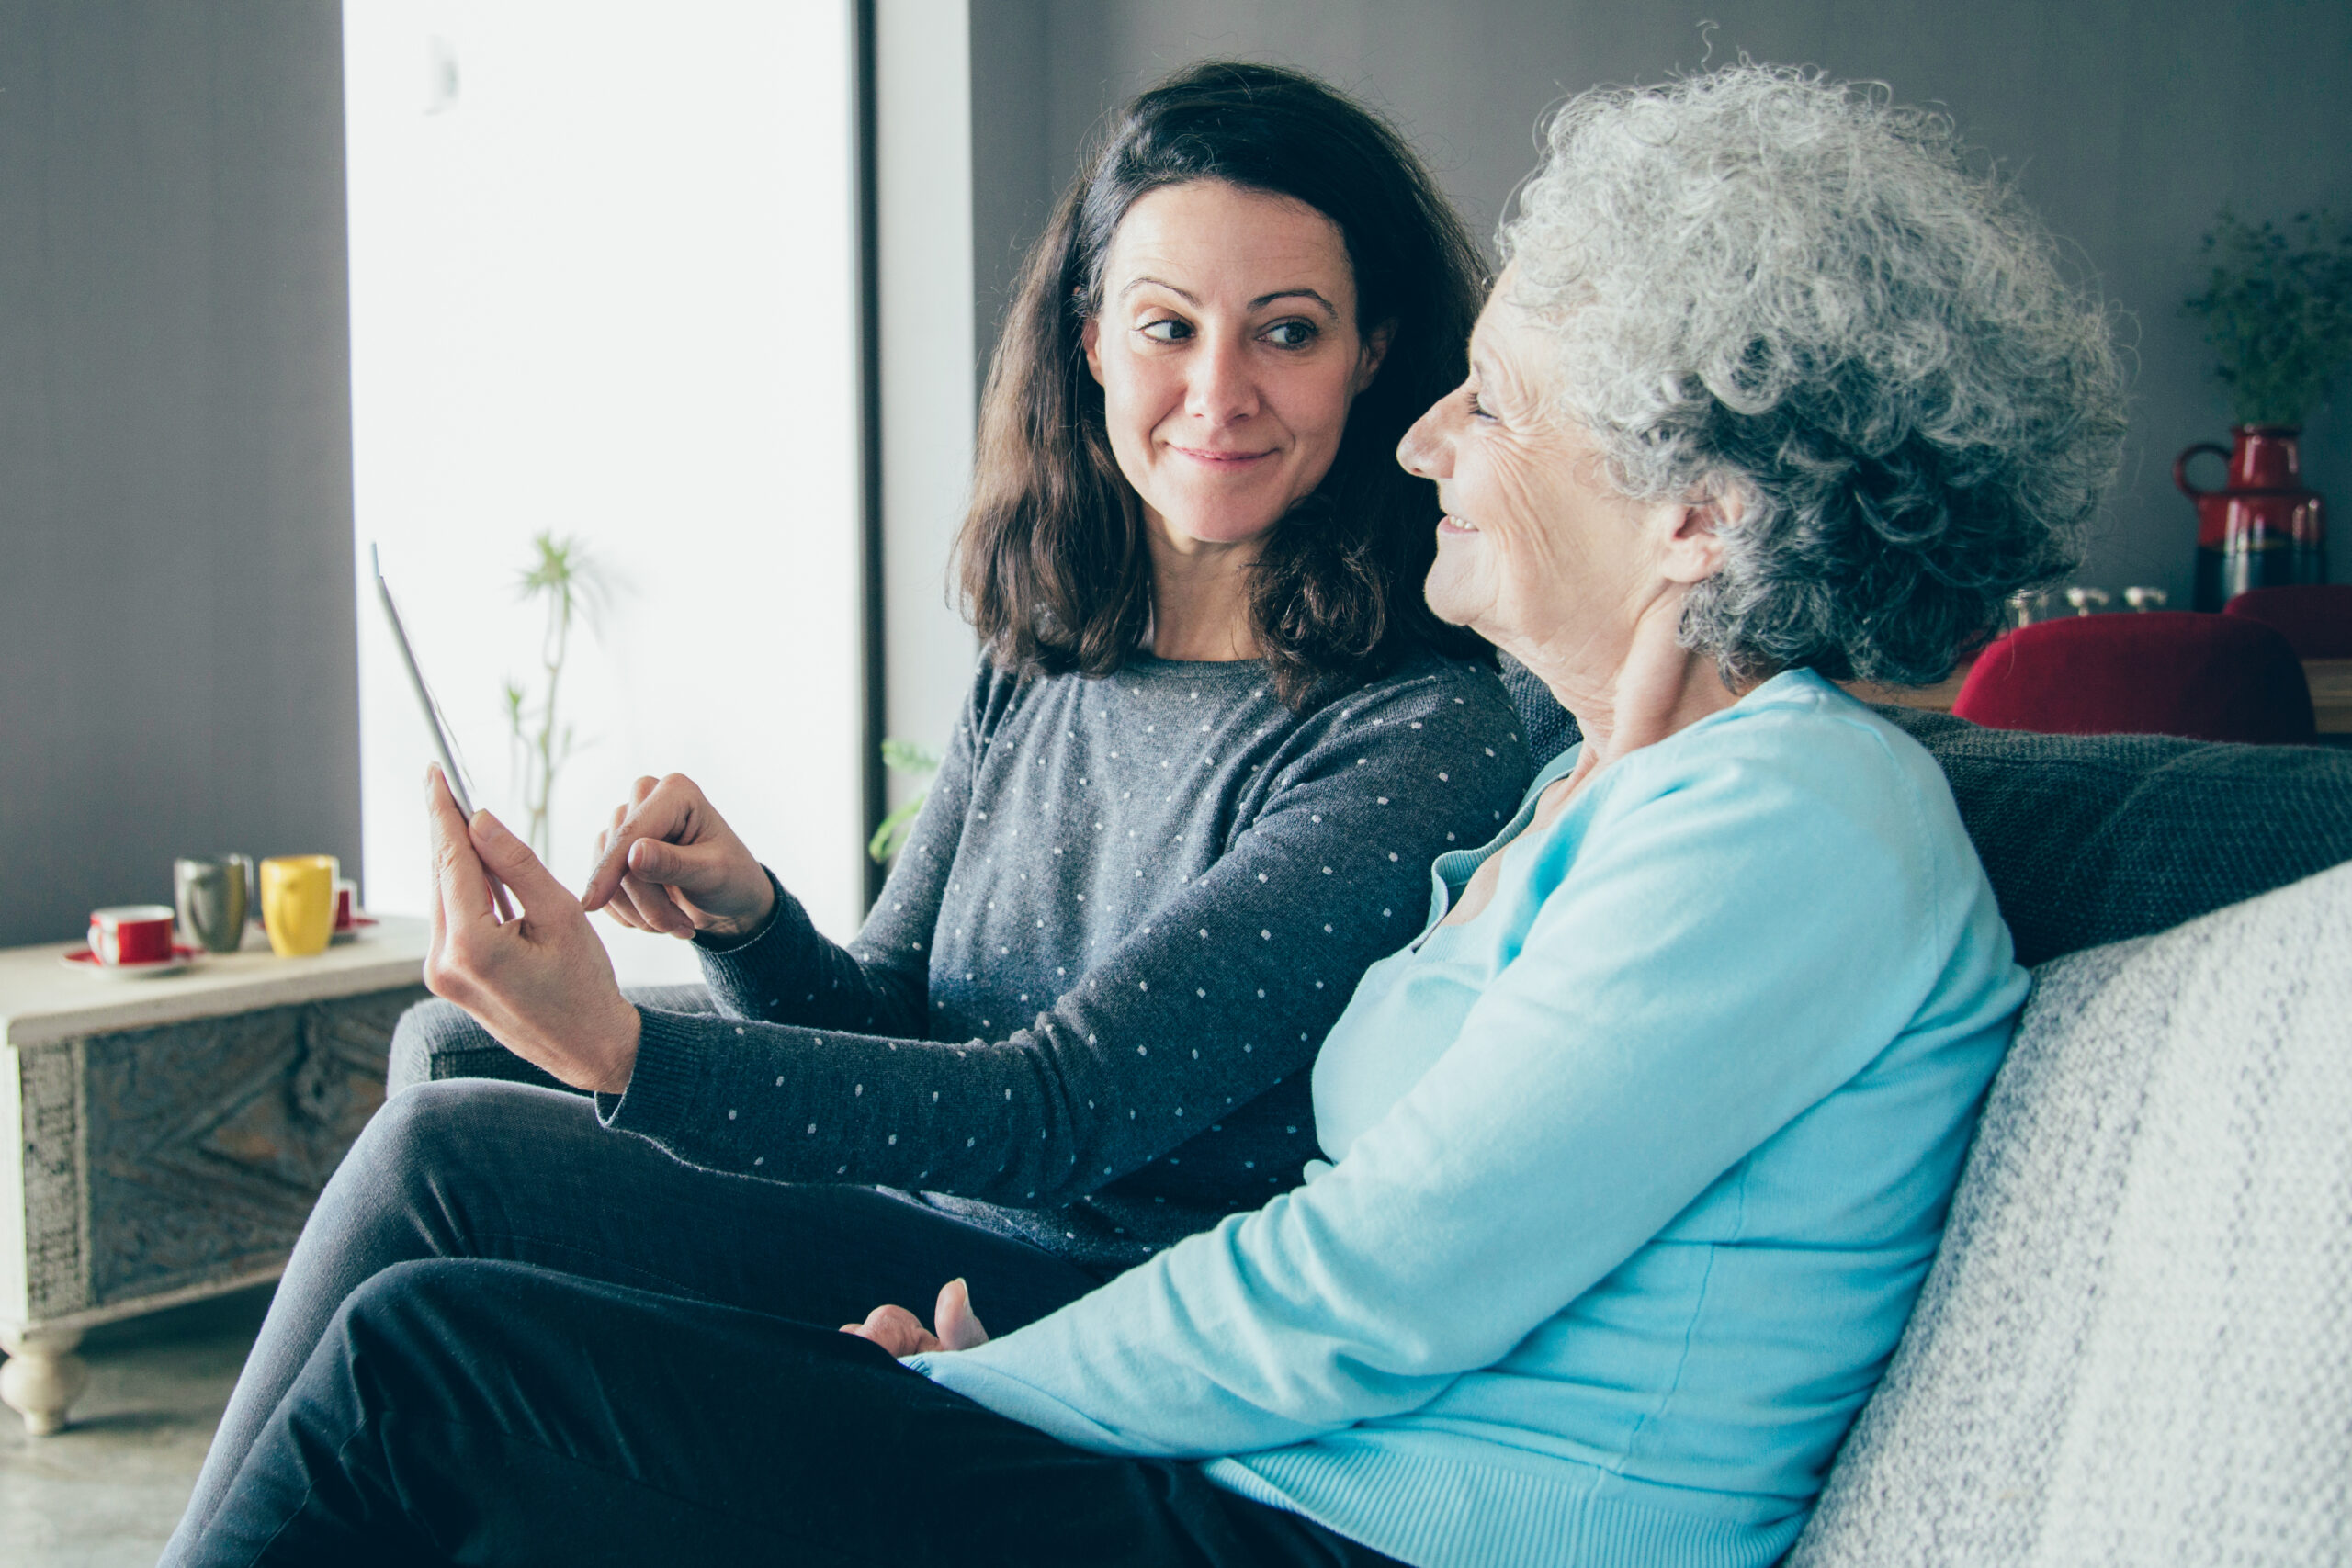 Here are some additional tips for caring for aging parents: